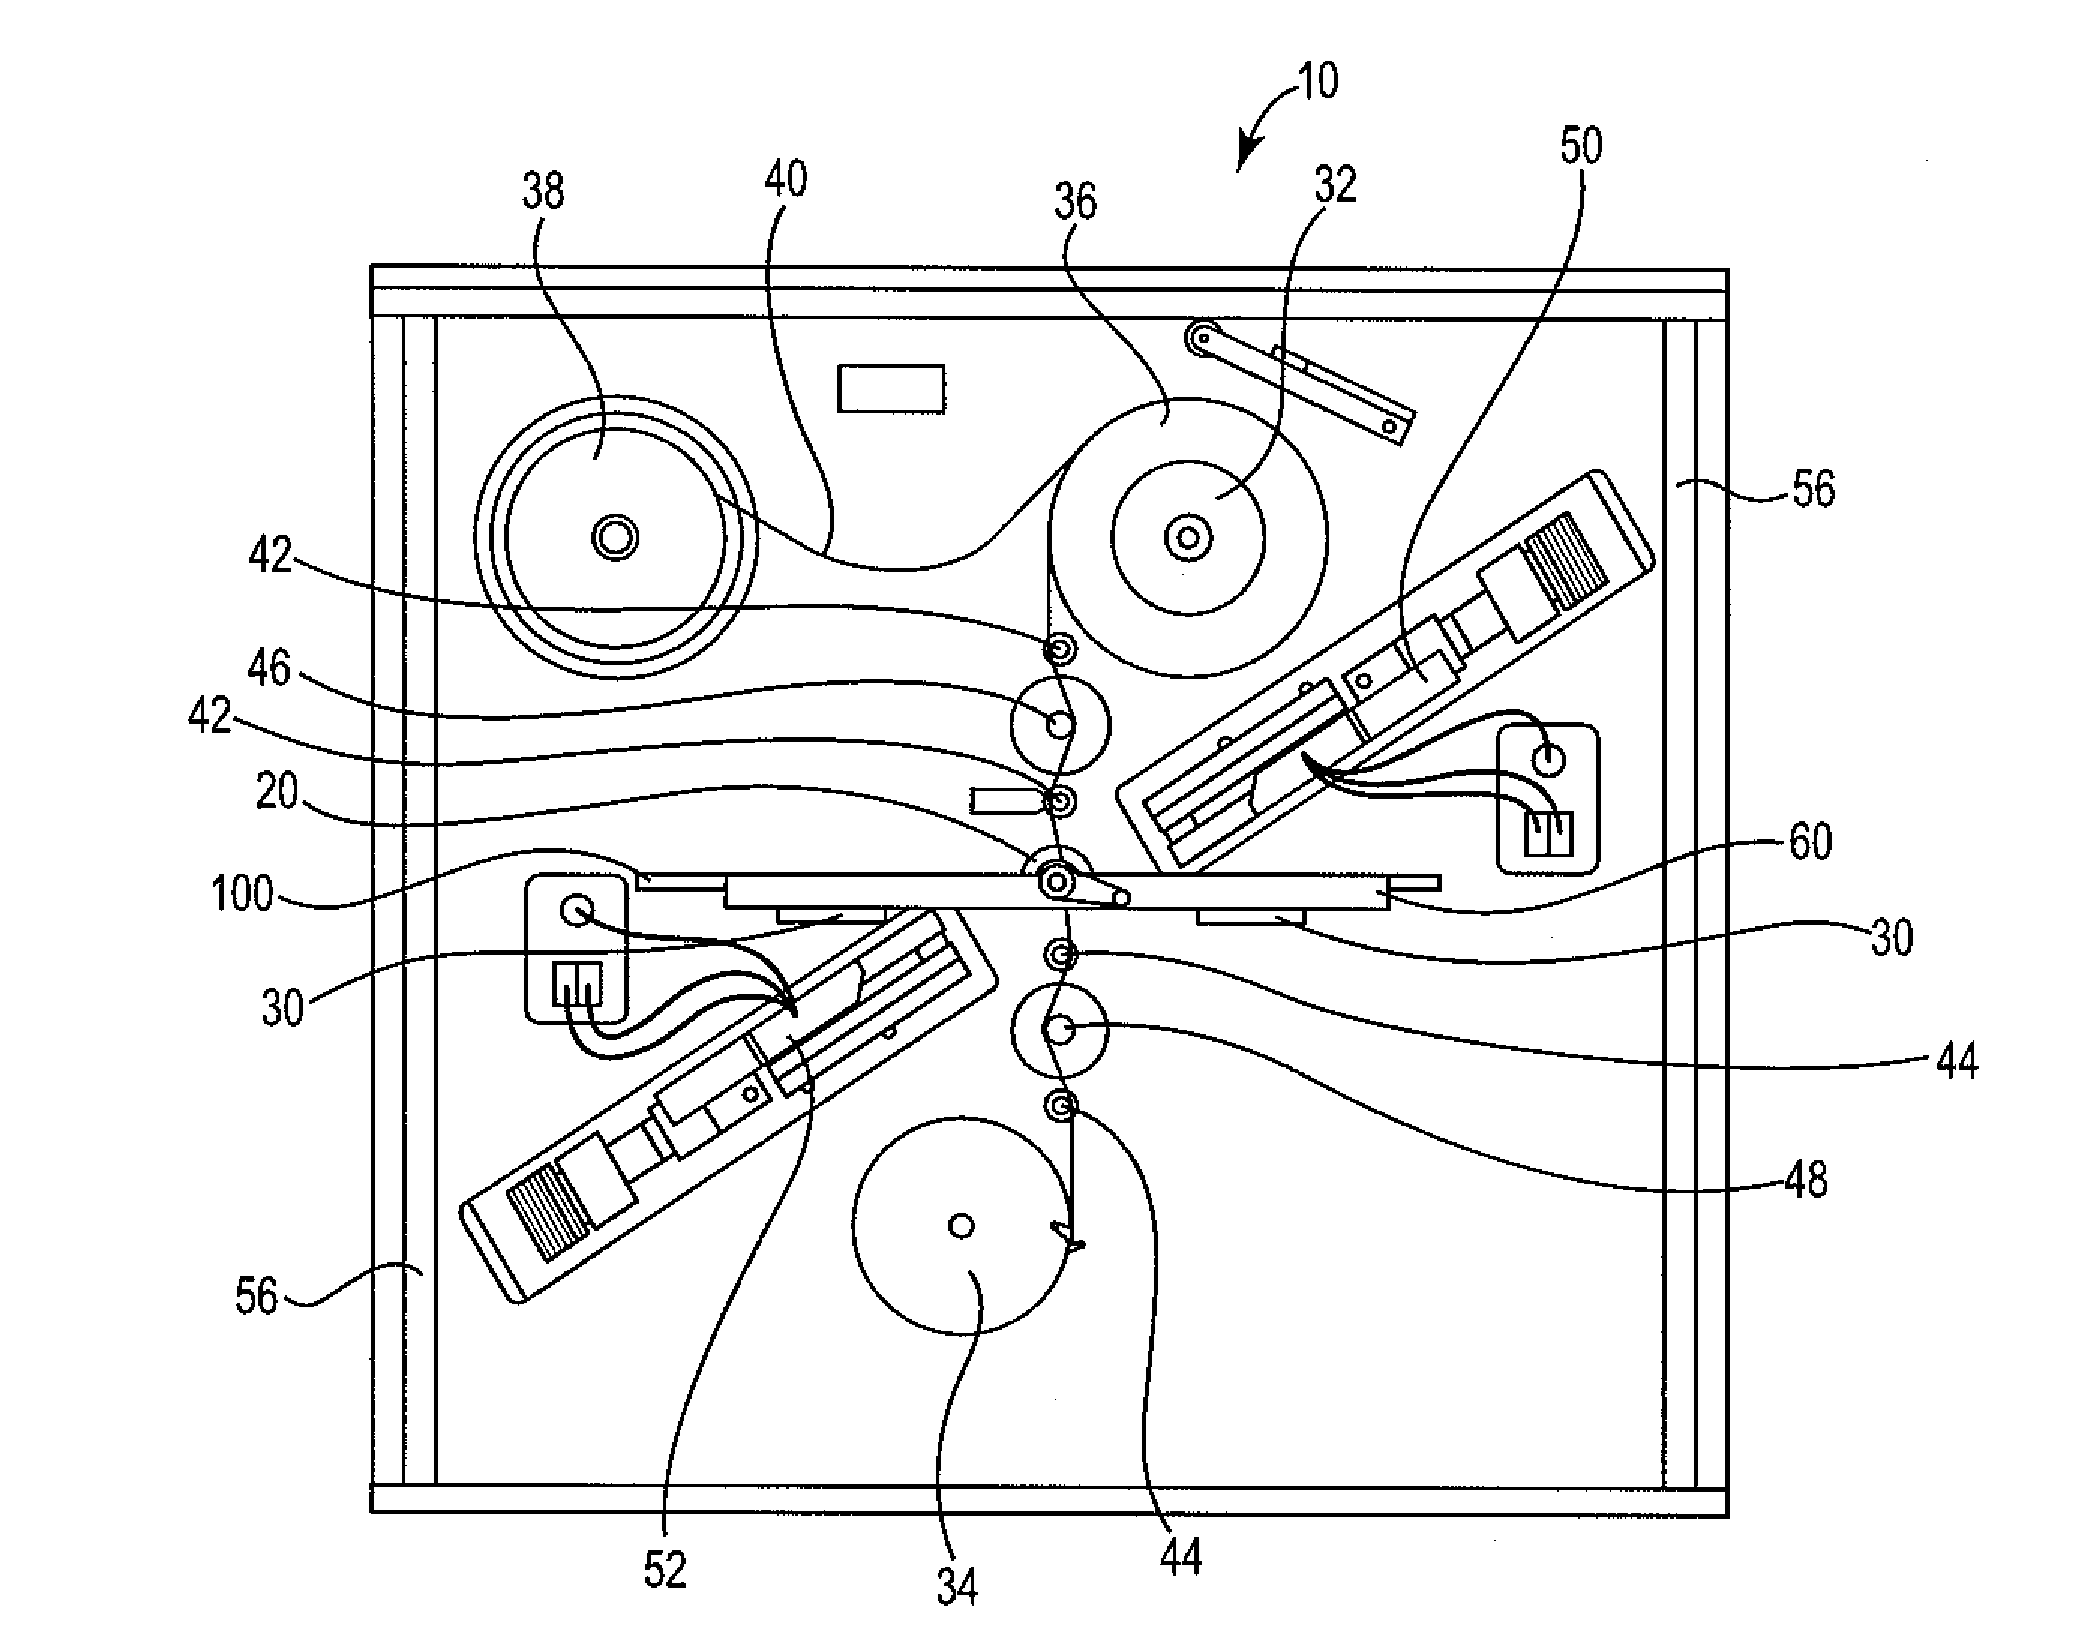 Coiling device for making an electrode assembly and methods of use